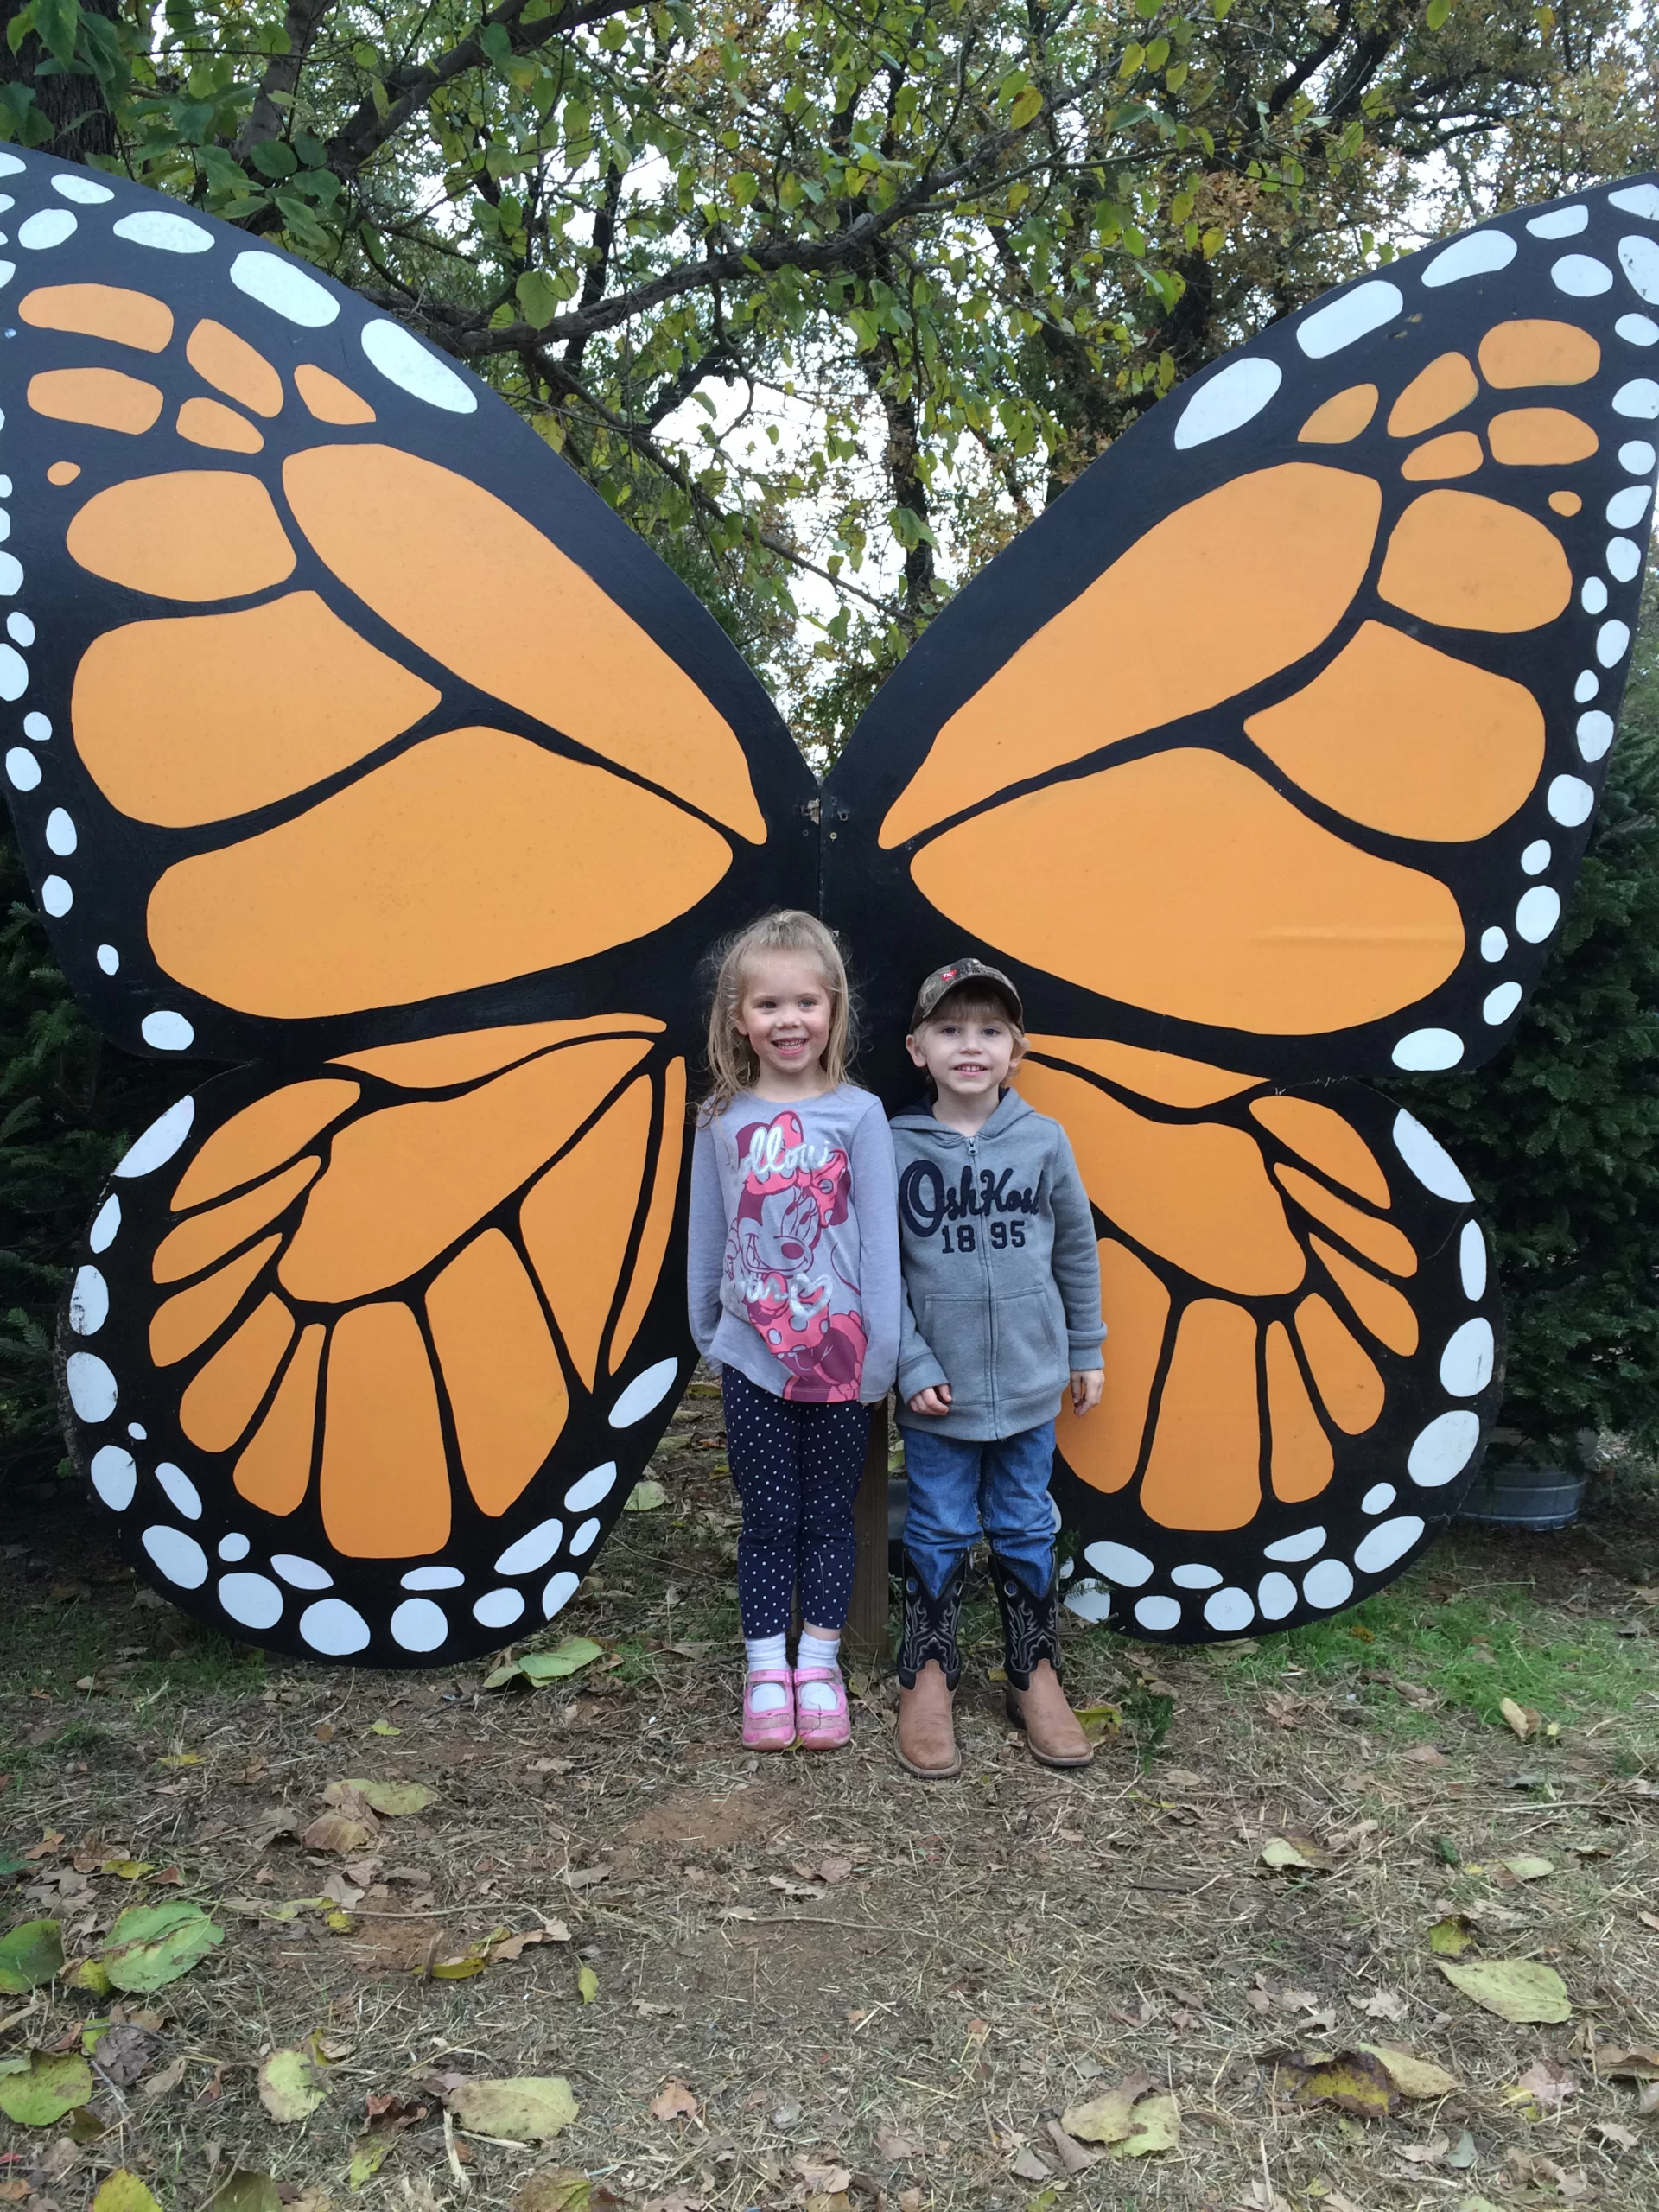 Two kids posing in front of a giant butterfly for a professional photograph picture.